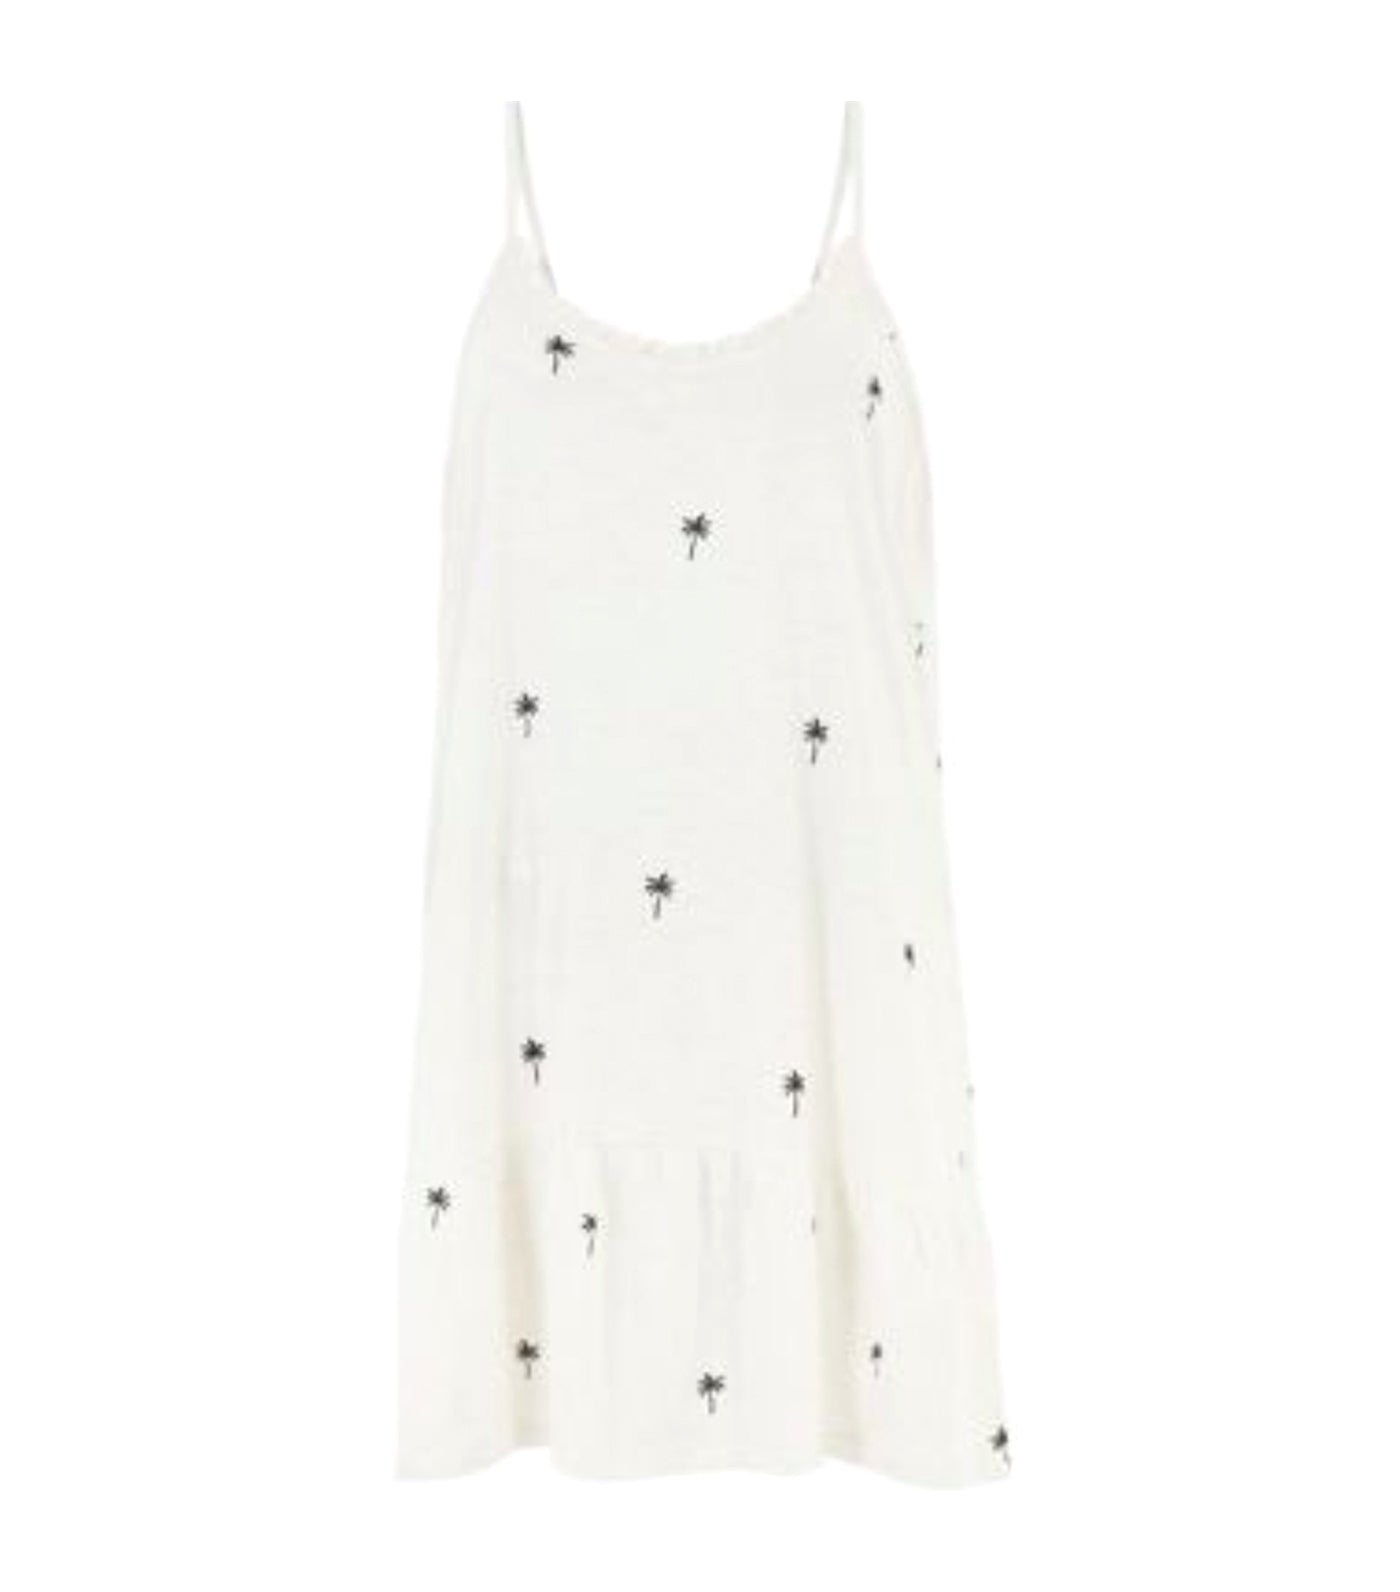 marks and spencer cool comfort palm print chemise - oatmeal mix